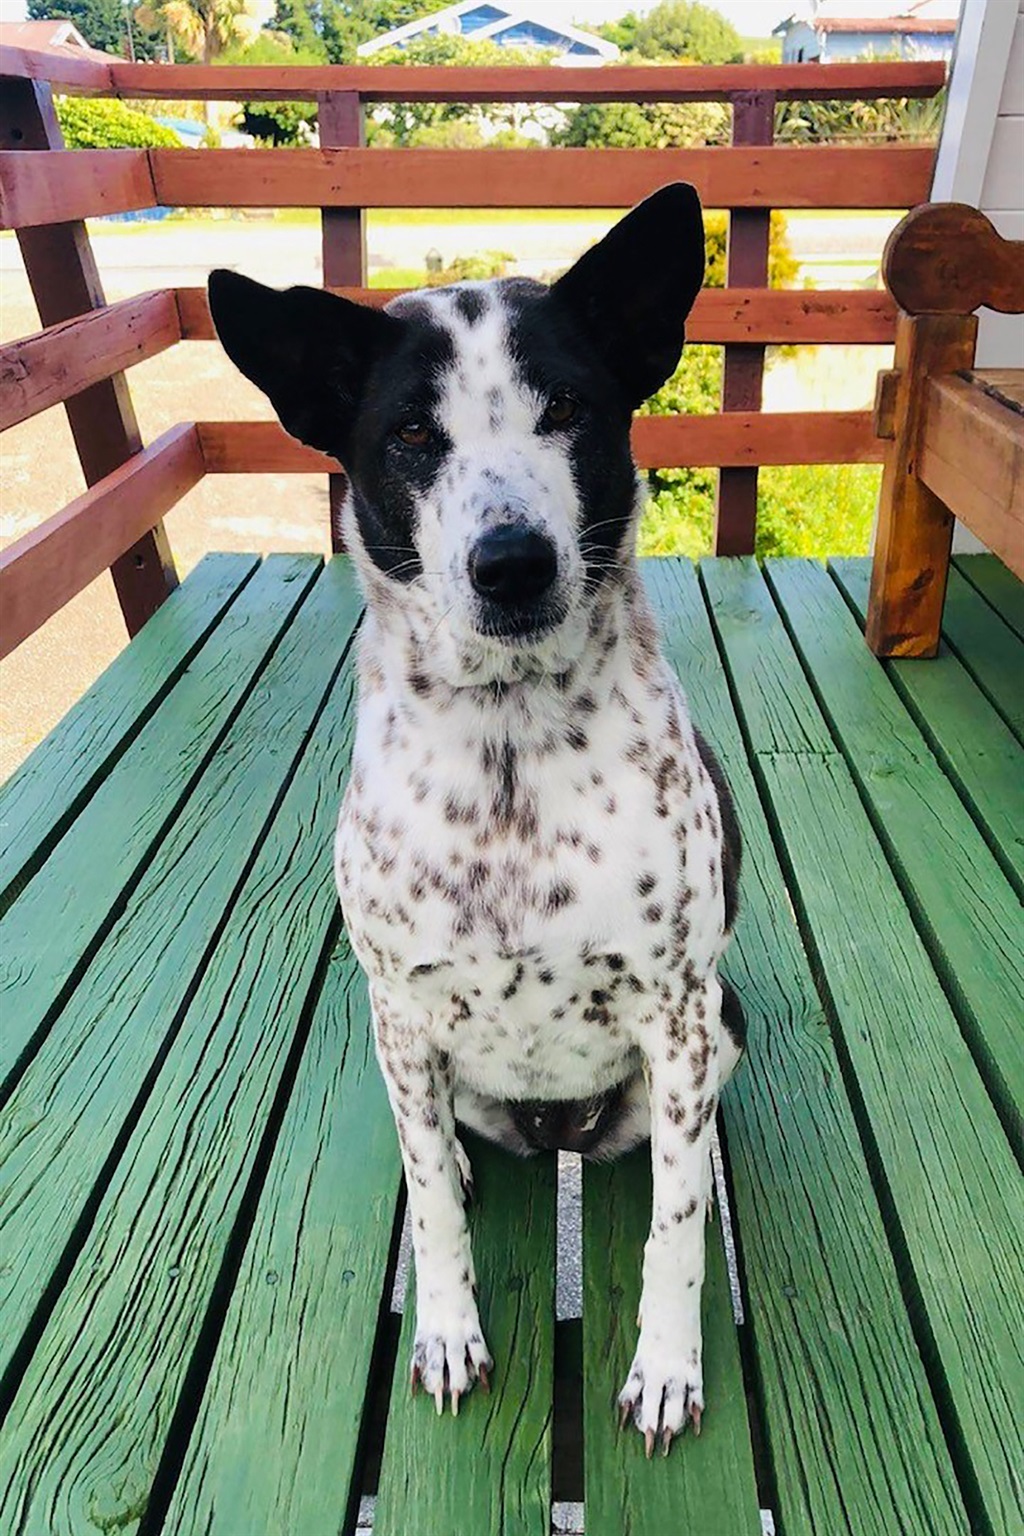 Black and white spotted dog sits on a green porch.